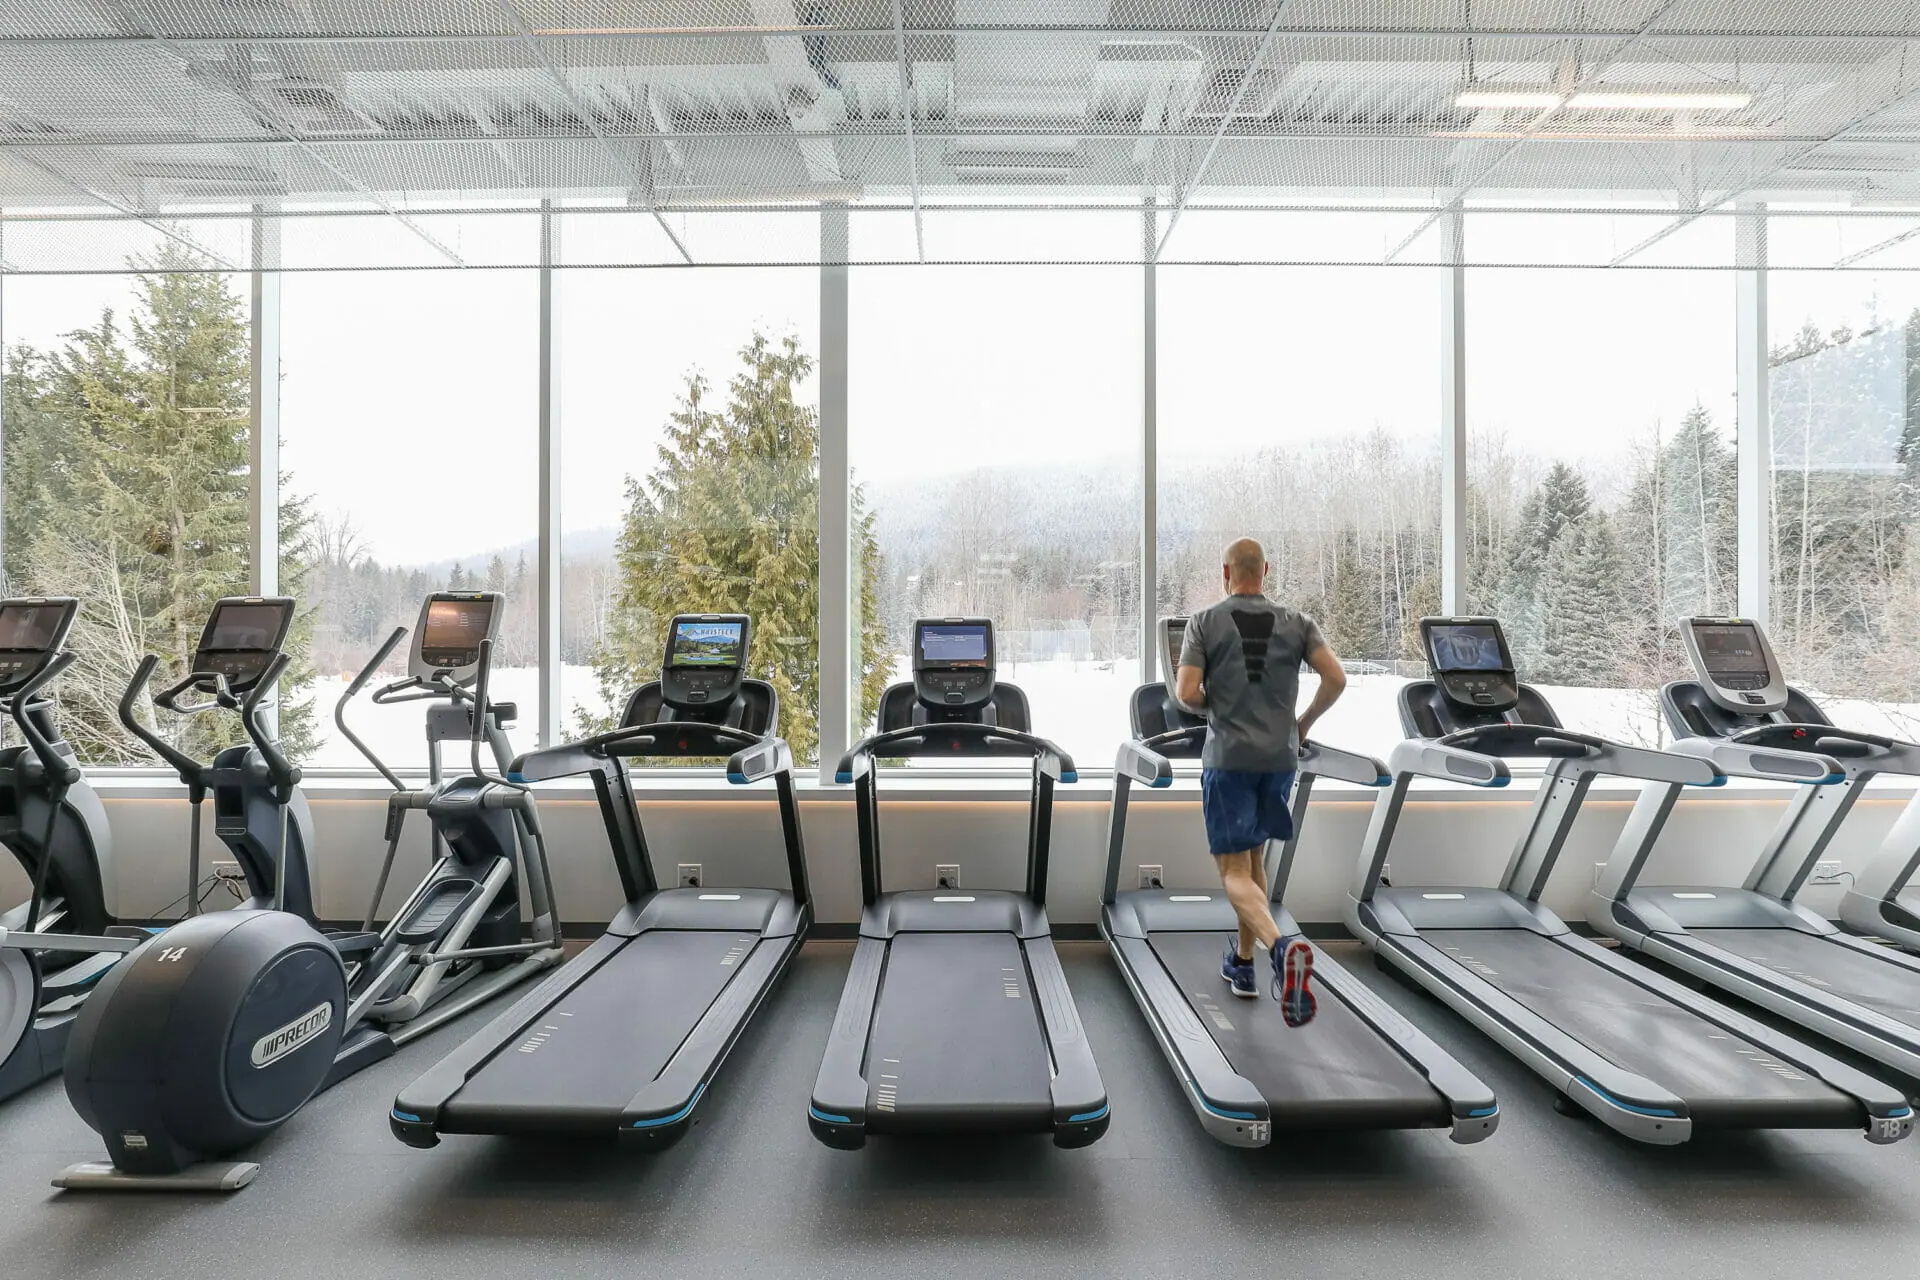 https://www.whistler.ca/wp-content/uploads/2023/03/Expanded-fitness-centre-cardio-area-image-by-Coast-Mountain-Photography.jpg.webp